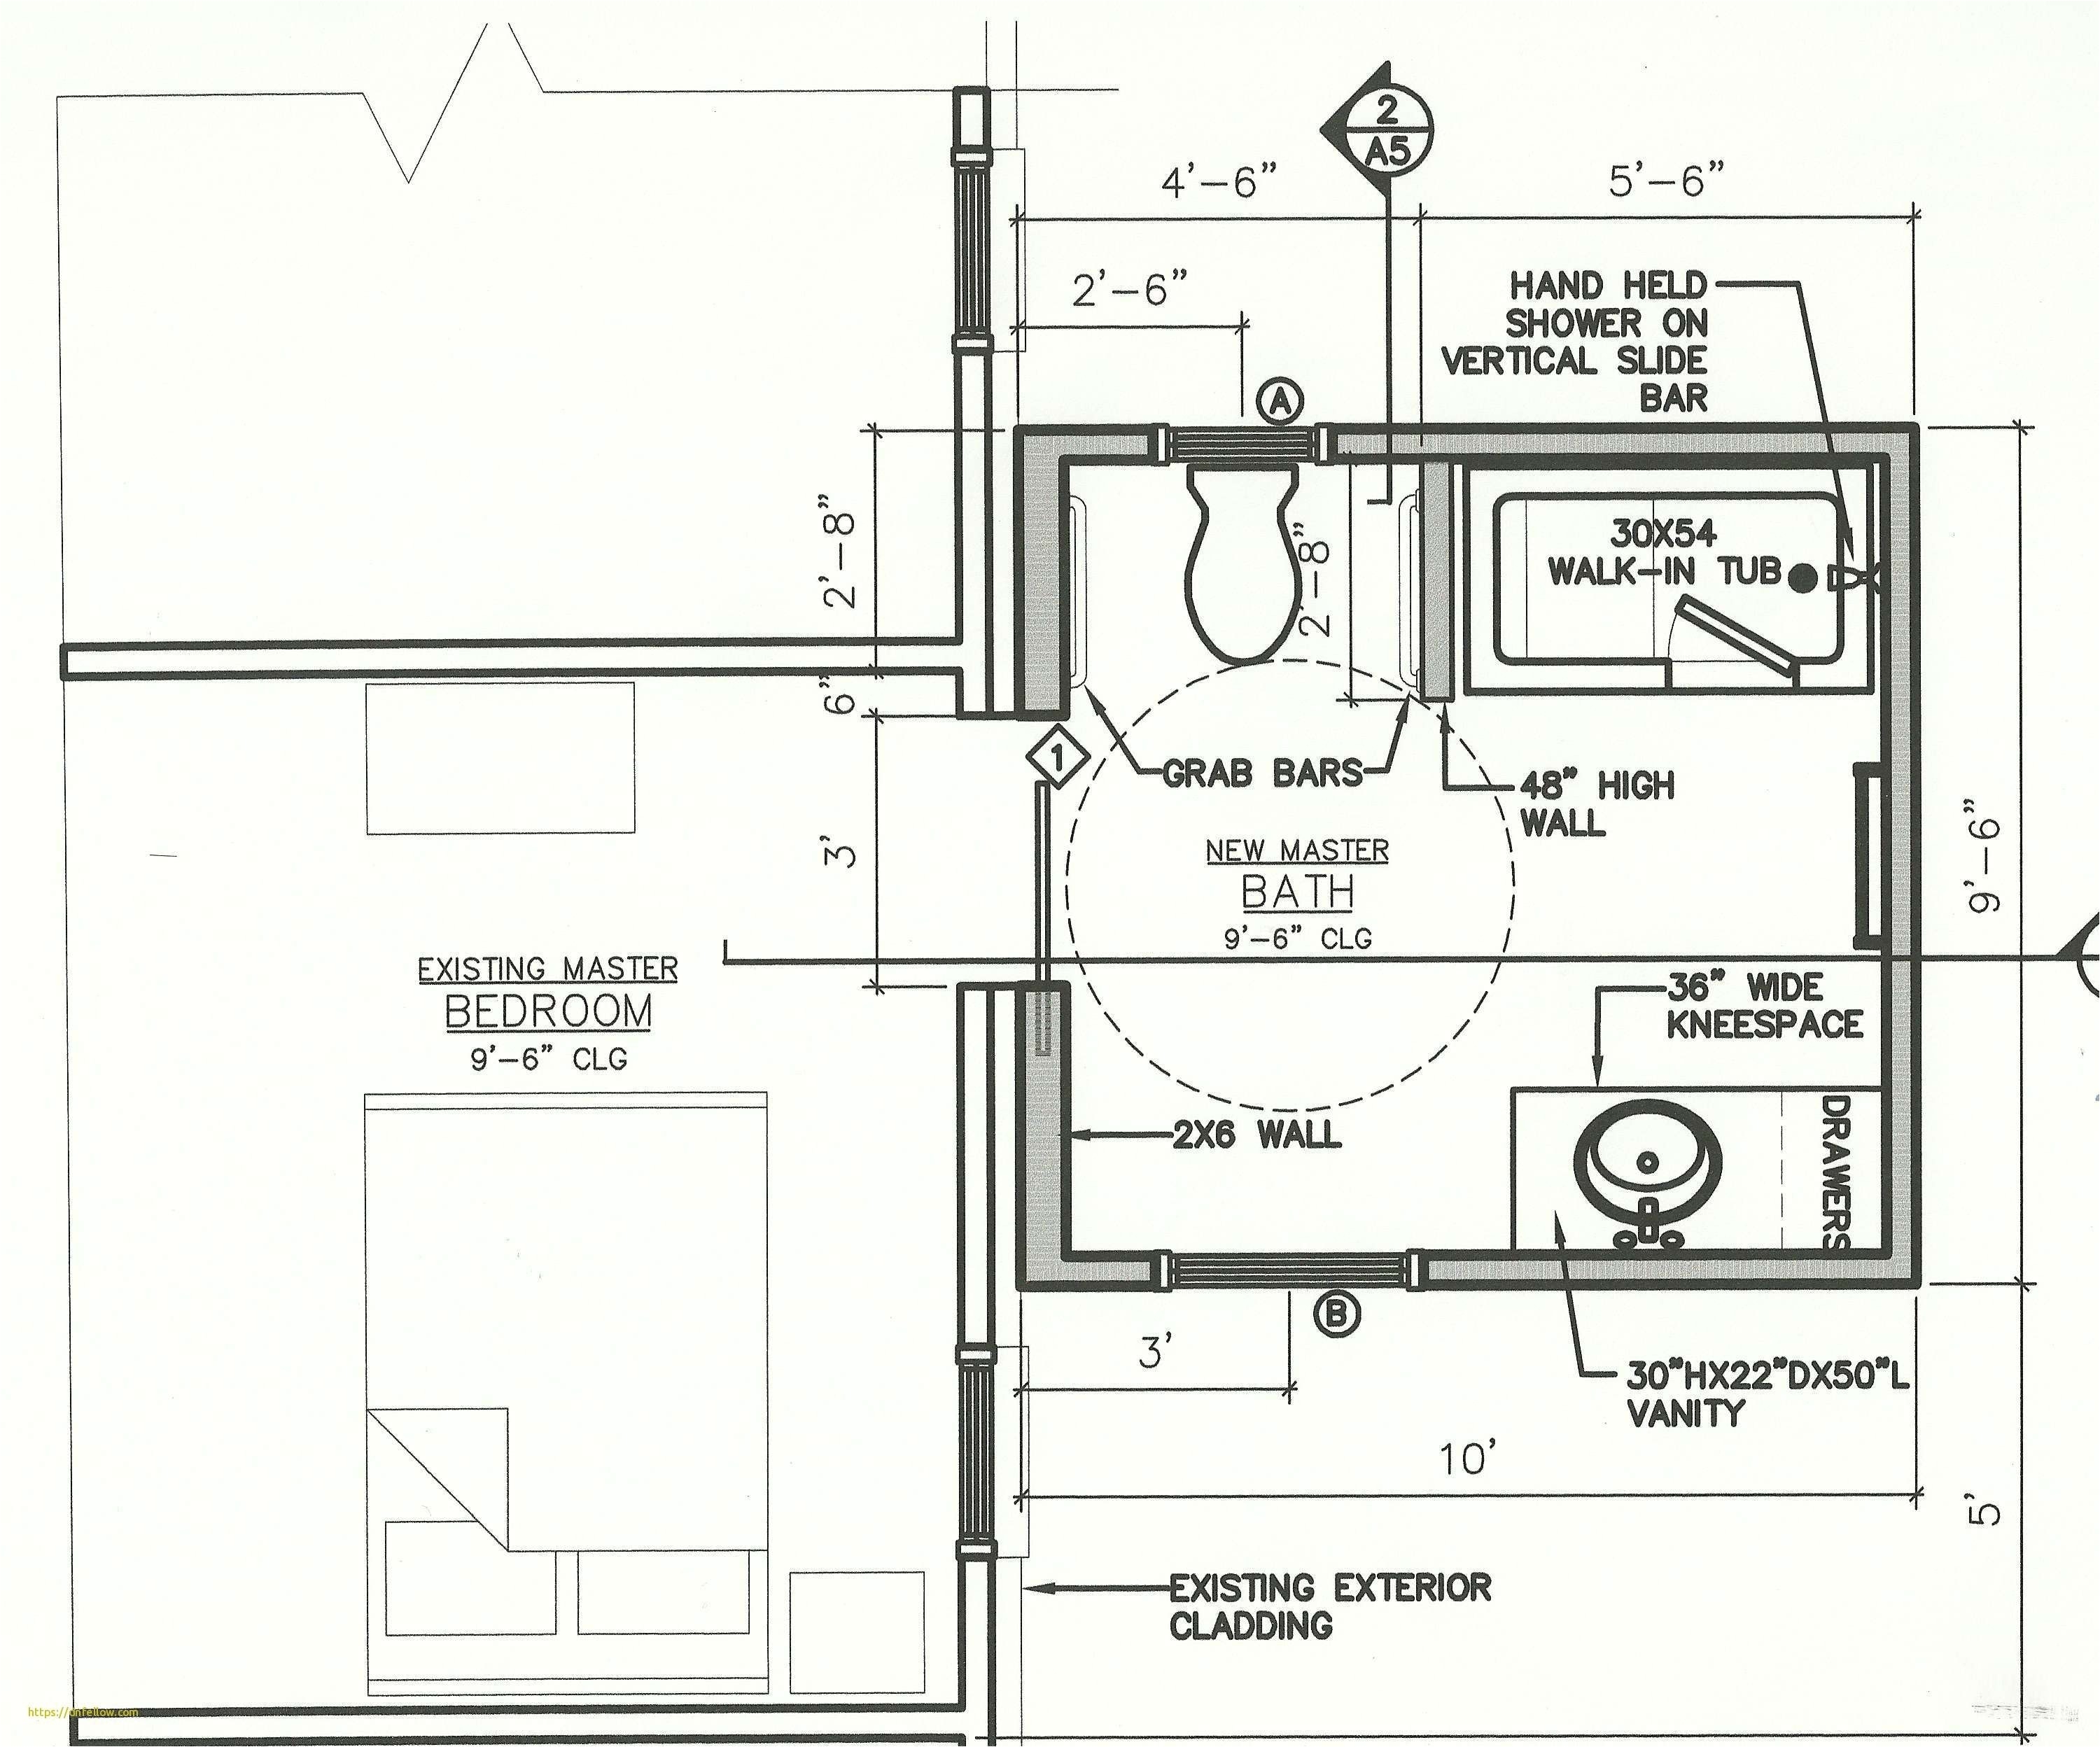 free house plans fresh house plan designs s lovely awesome free floor plans unique collection of